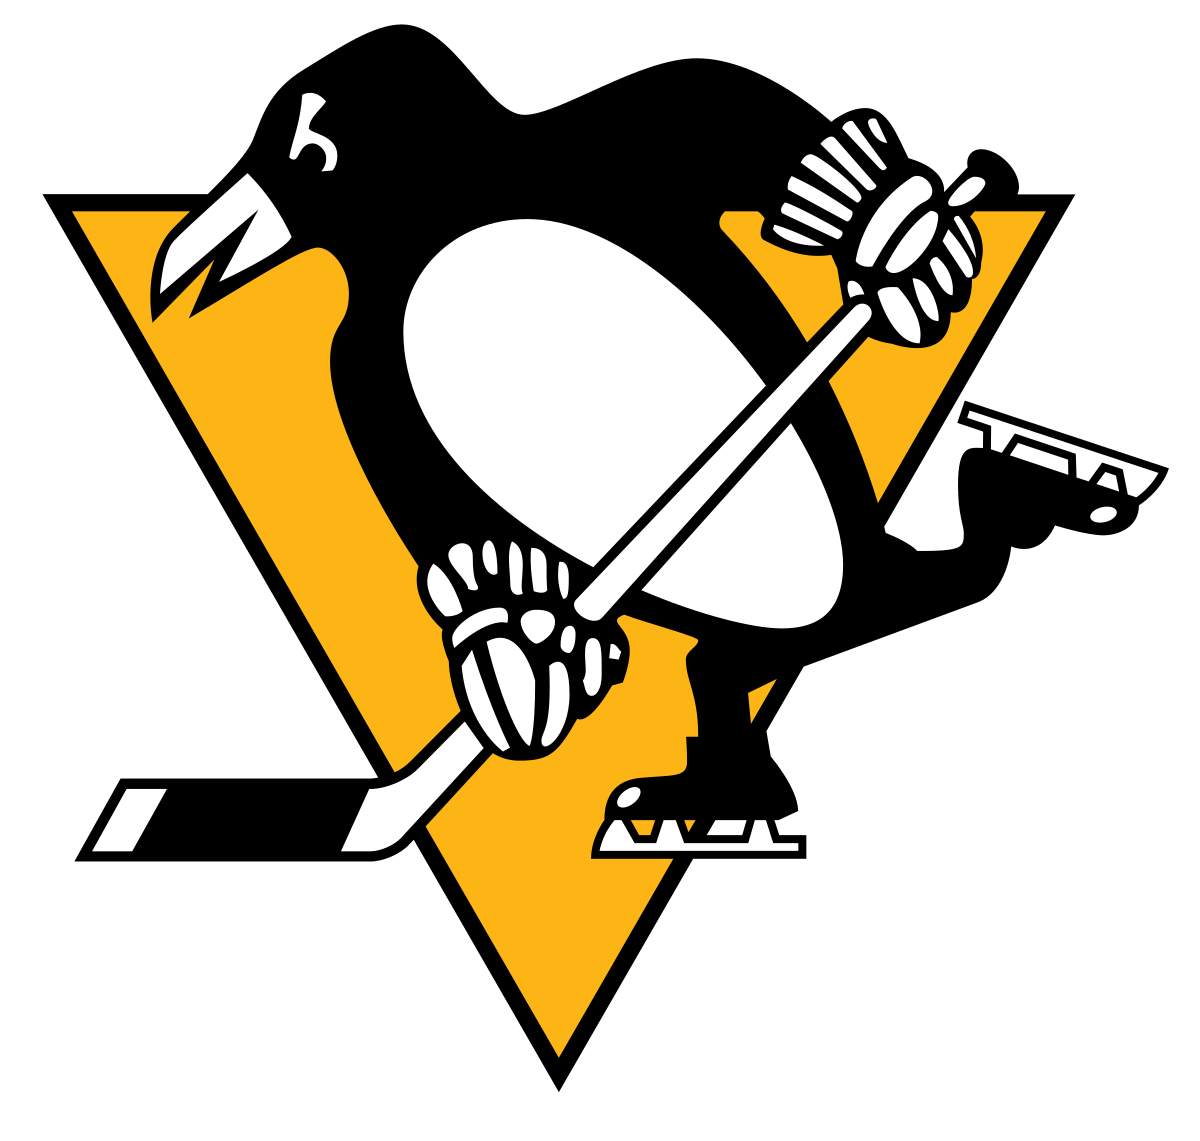 Clipart penquin group penguin. Pittsburgh penguins wikipedia coolers